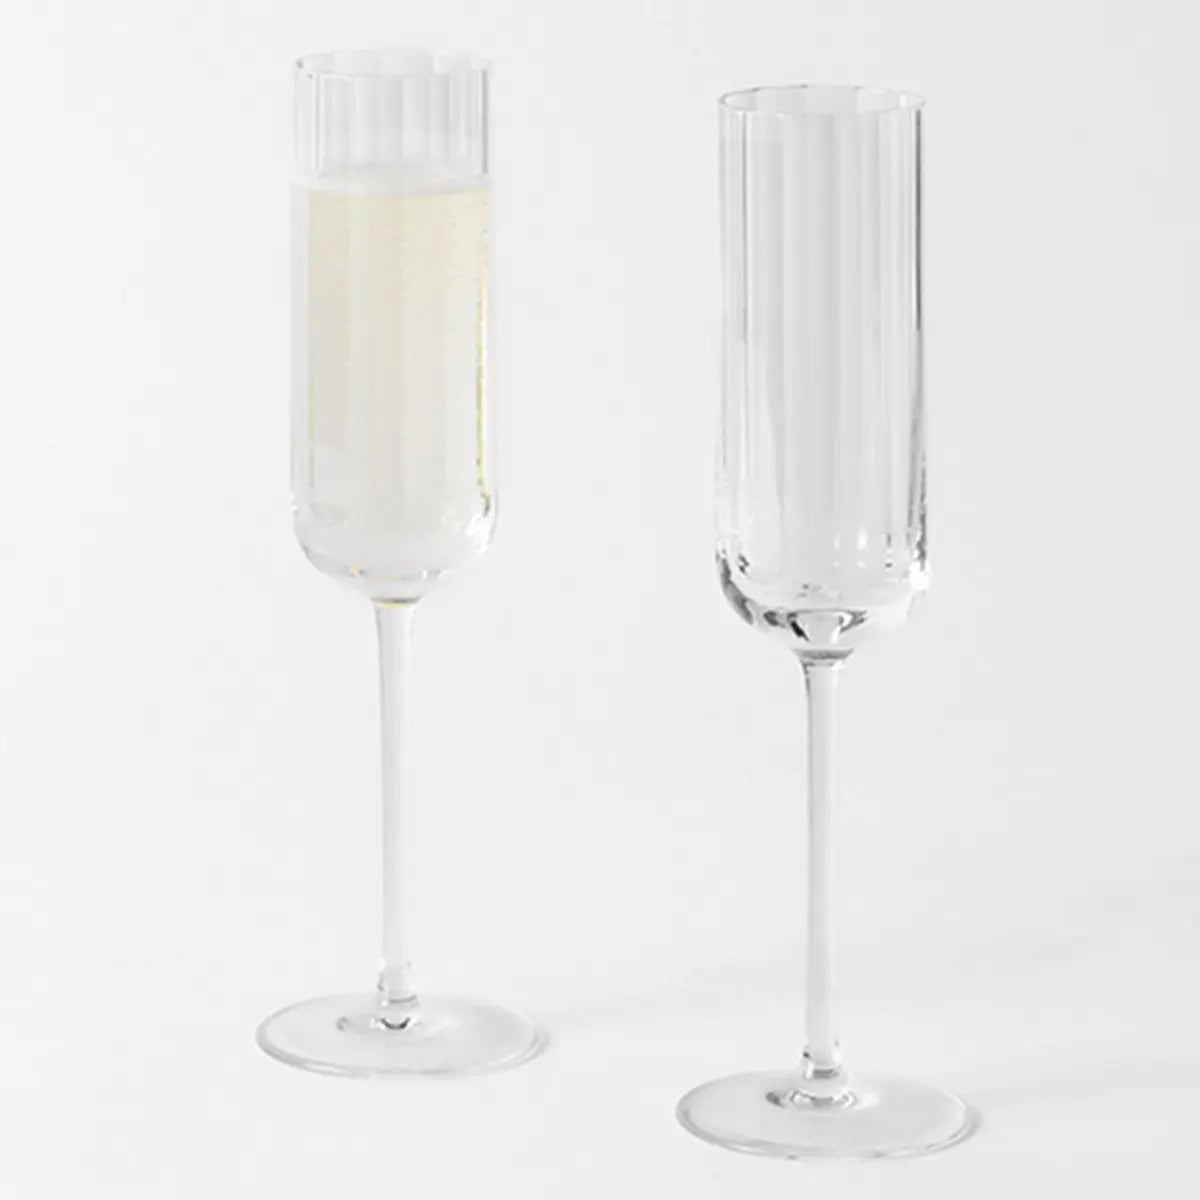 Richard Brendon Pair of Fluted Champagne Flutes with one filled and one empty